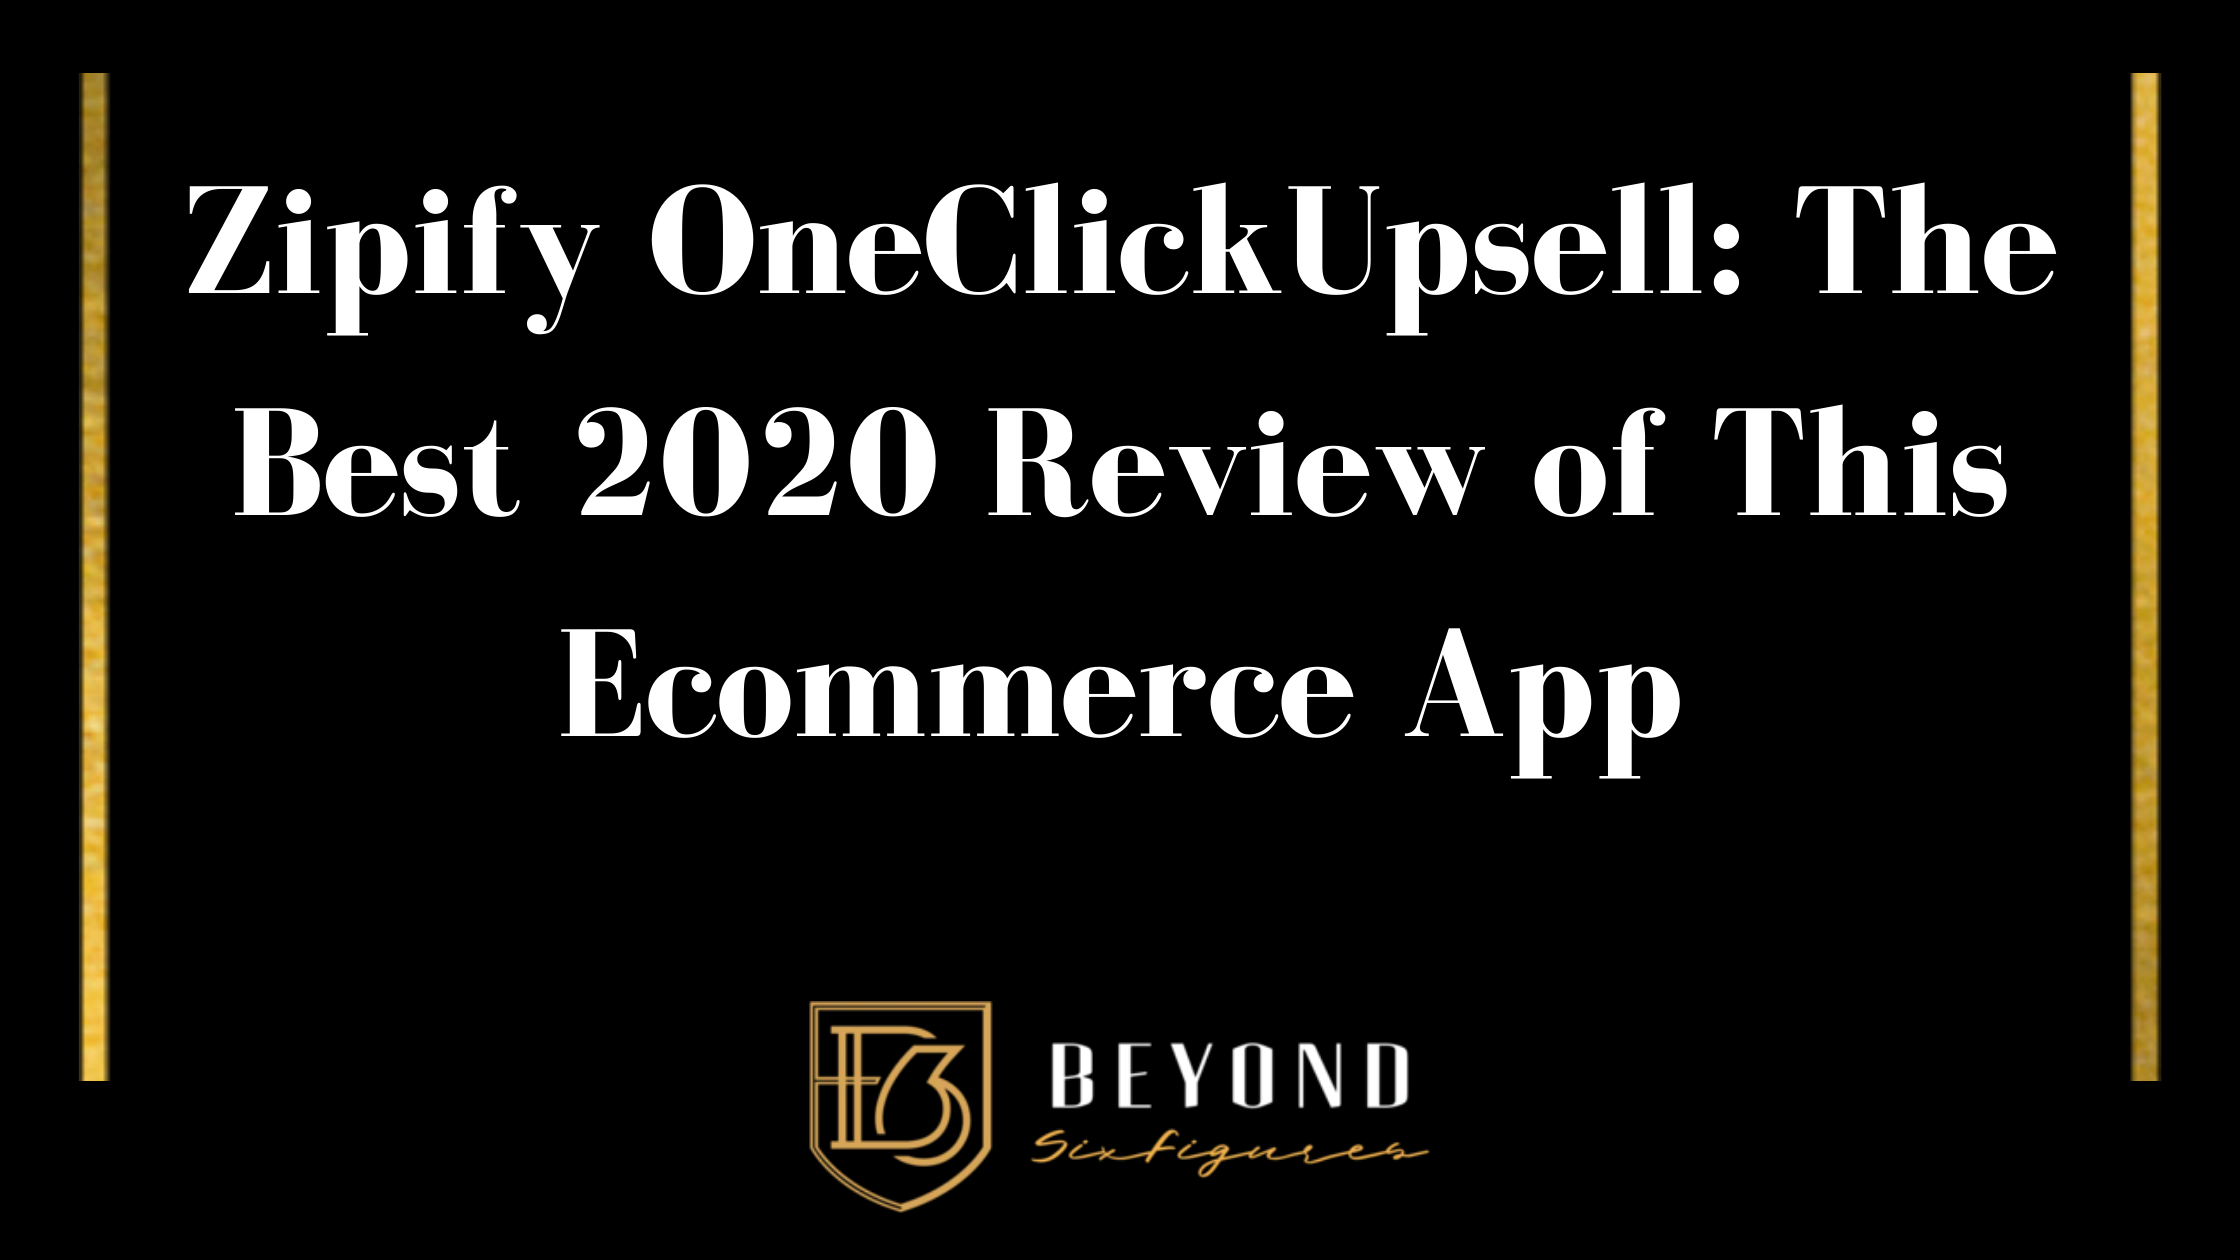 Zipify OneClickUpsell: The Best 2020 Review of this Ecommerce App